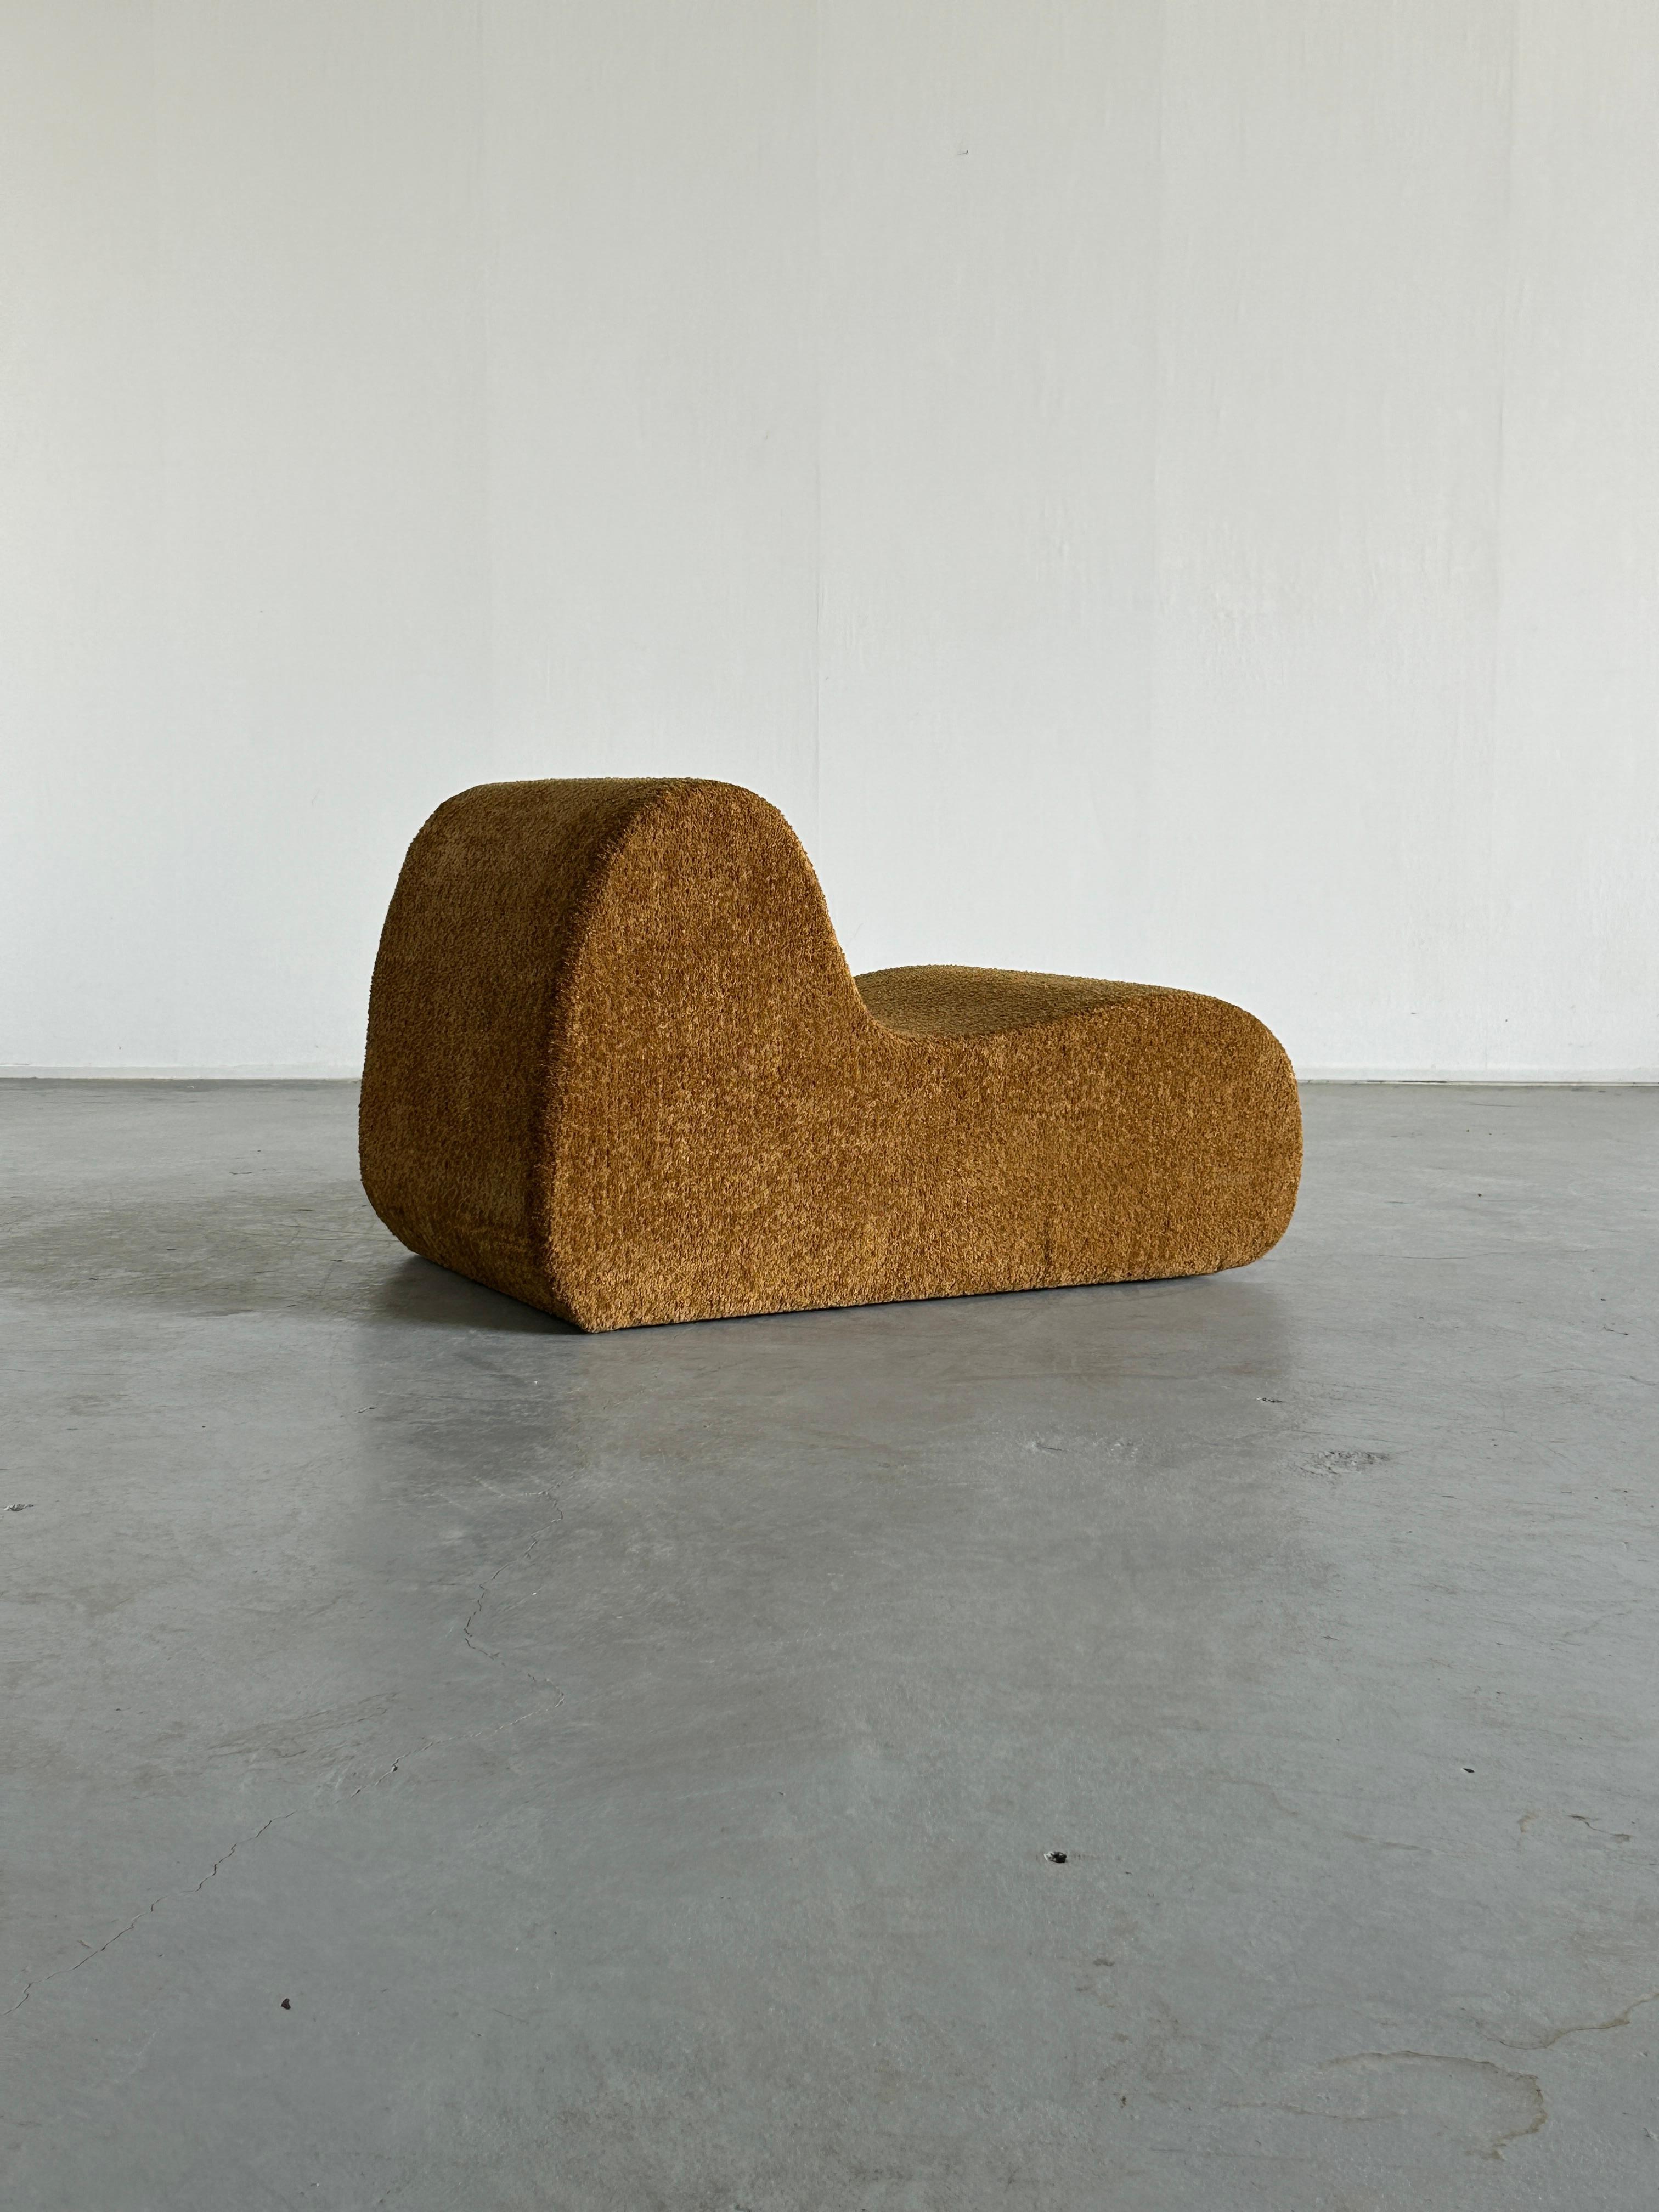 Vintage Italian Mid-Century-Modern Lounge Chair in Ochre Boucle, 1970s Italy For Sale 3